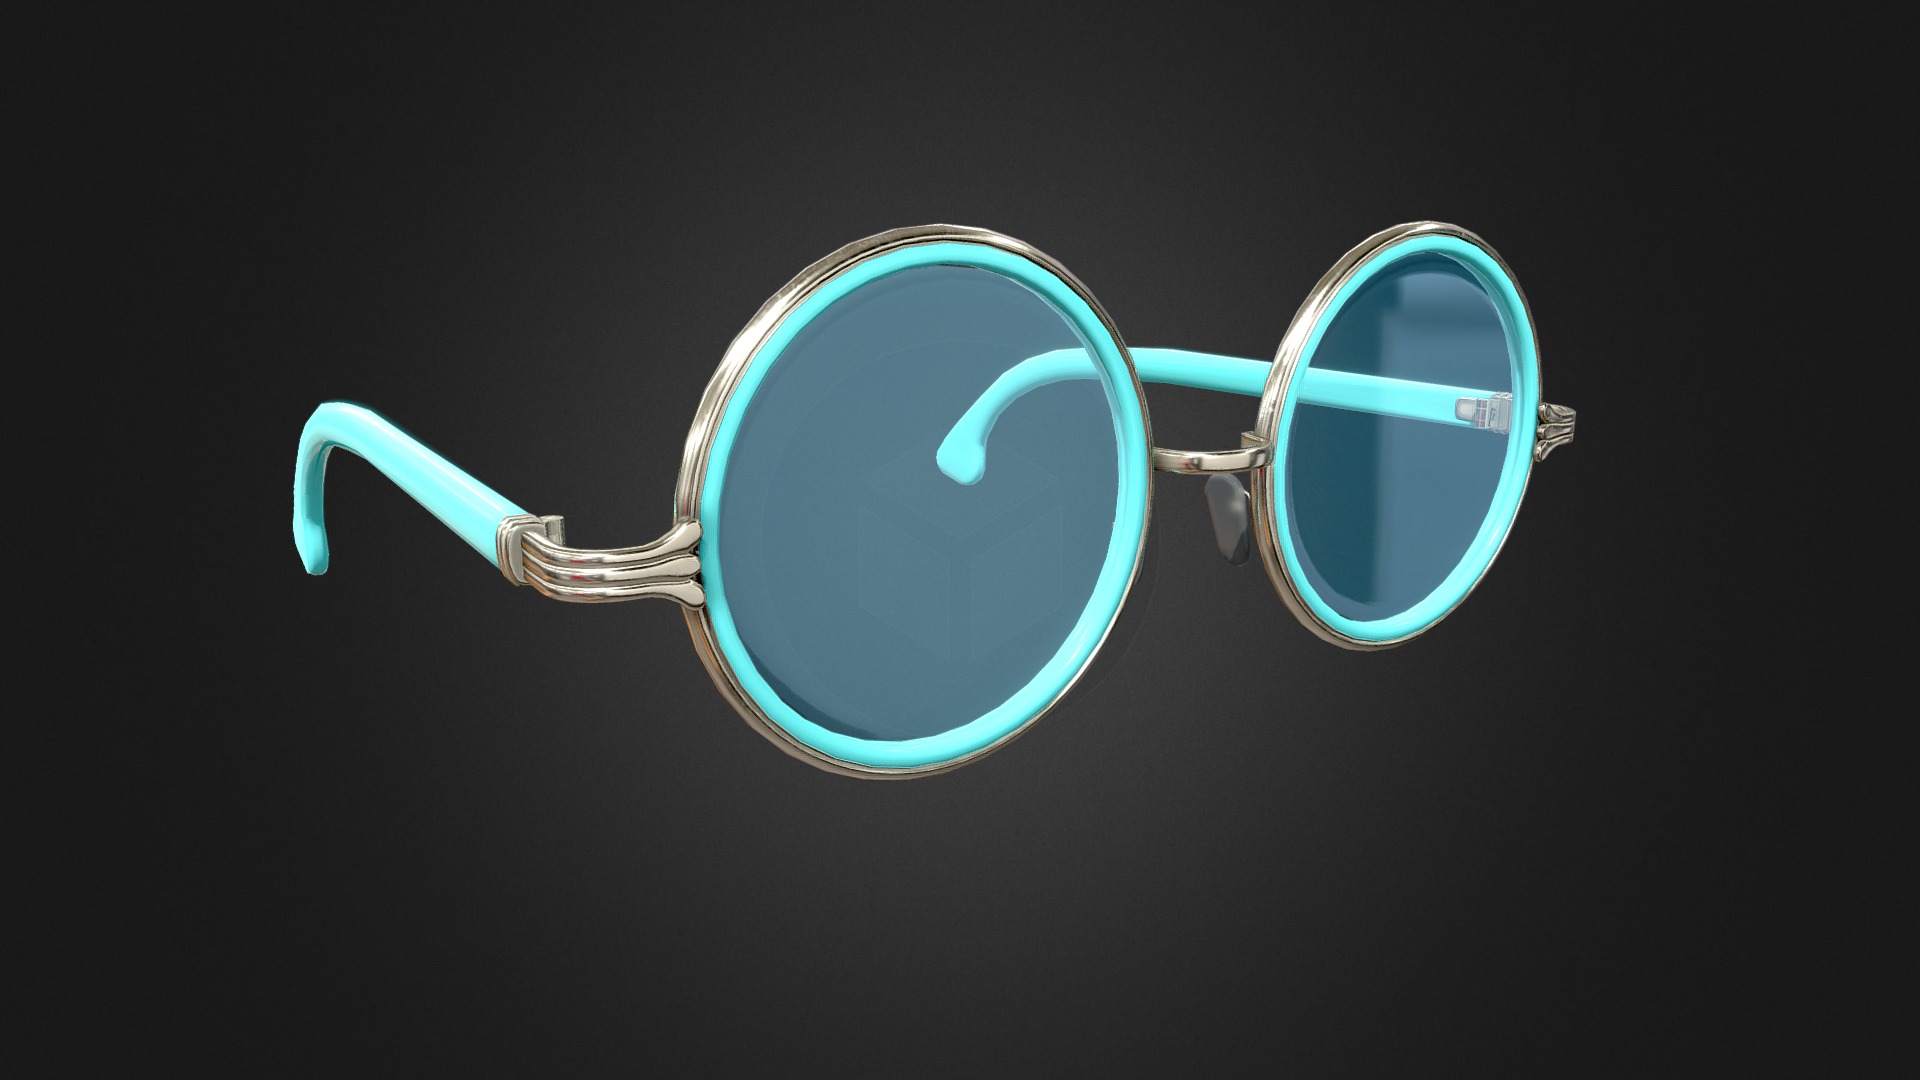 3D model Glasses Metal Frame Retro Classic Vintage Mint - This is a 3D model of the Glasses Metal Frame Retro Classic Vintage Mint. The 3D model is about a pair of blue glasses.